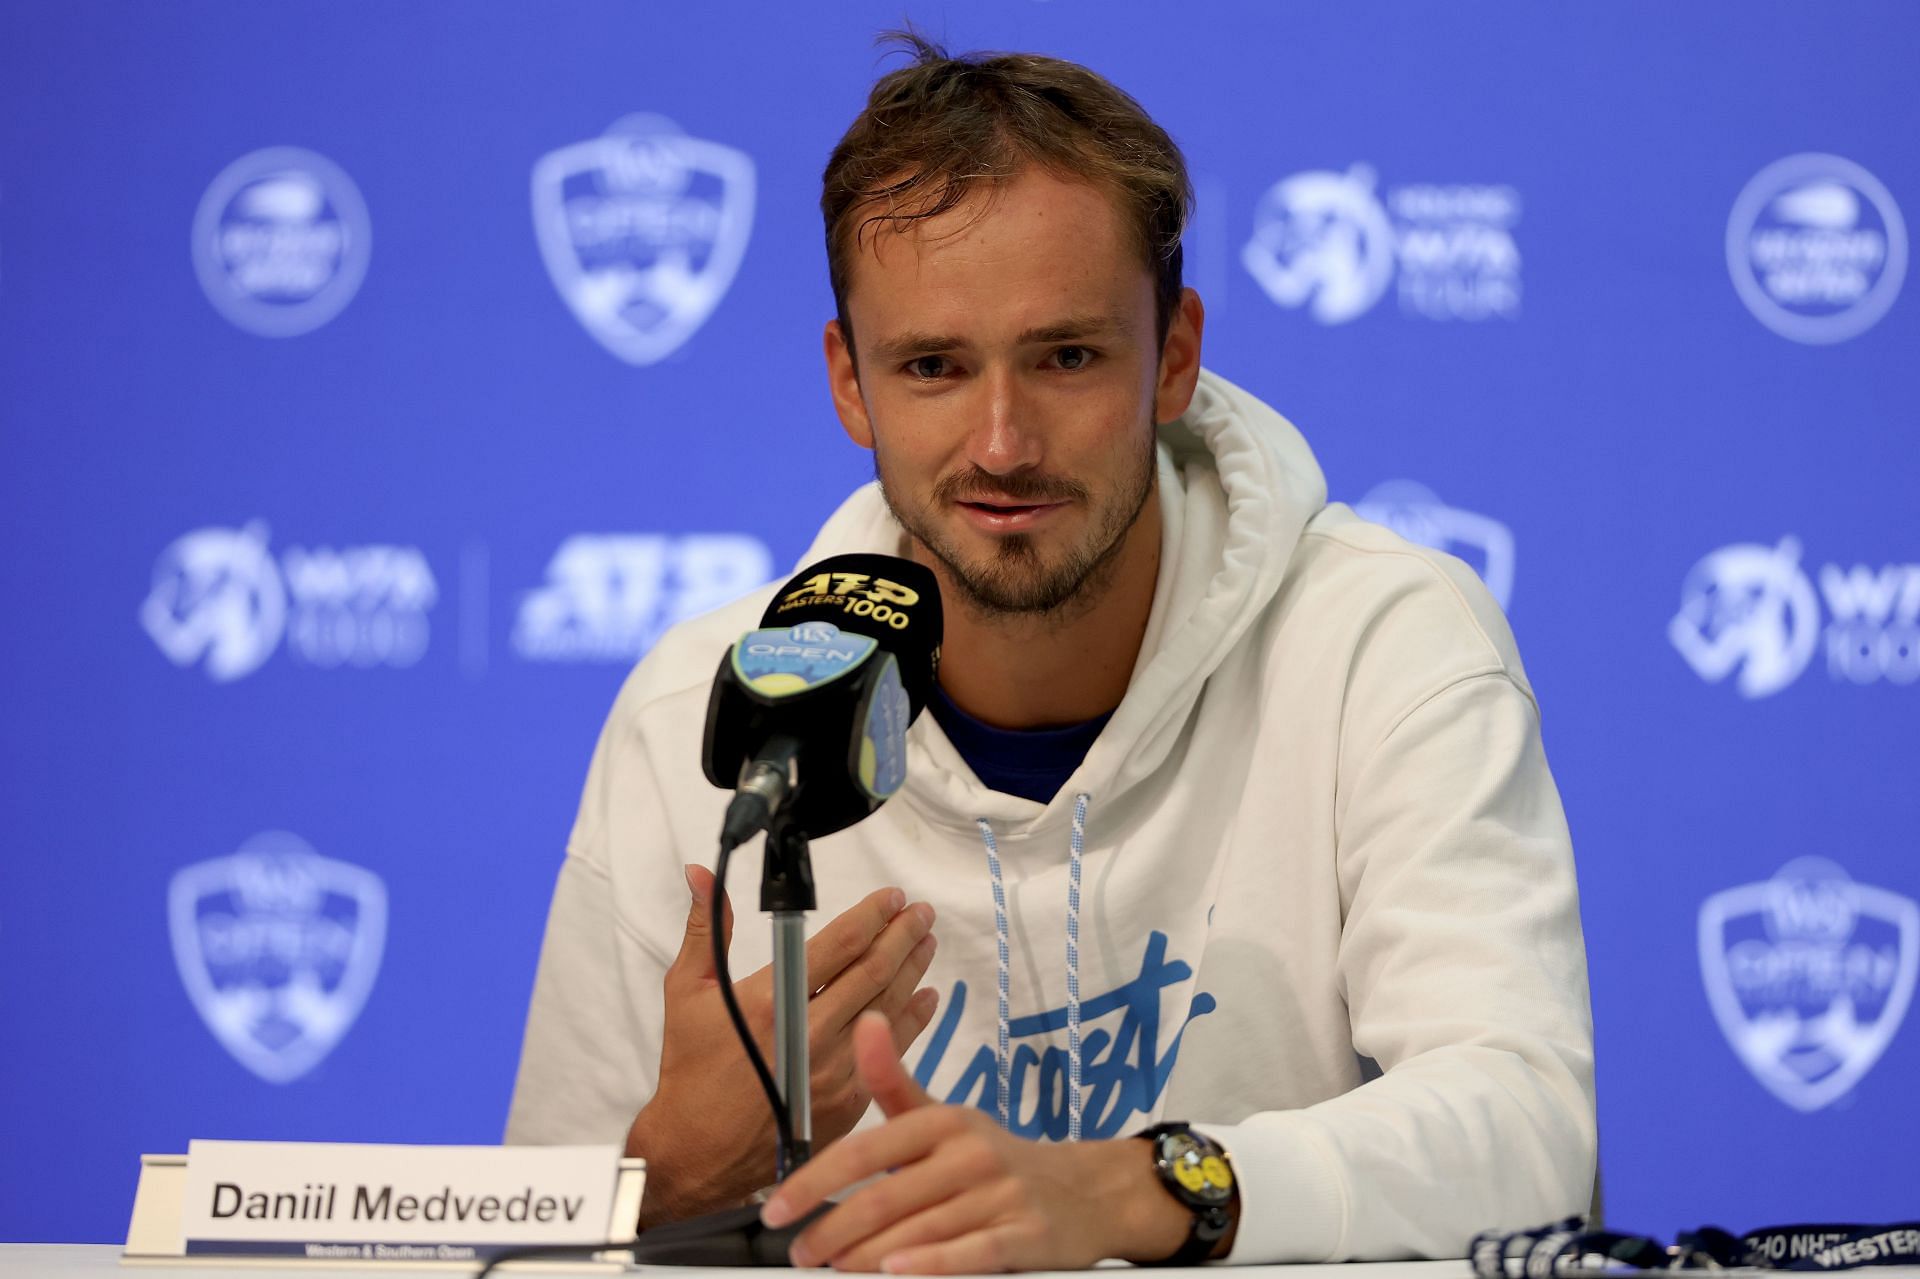 Medvedev fields questions from the media during the Western &amp; Southern Open - Day 2